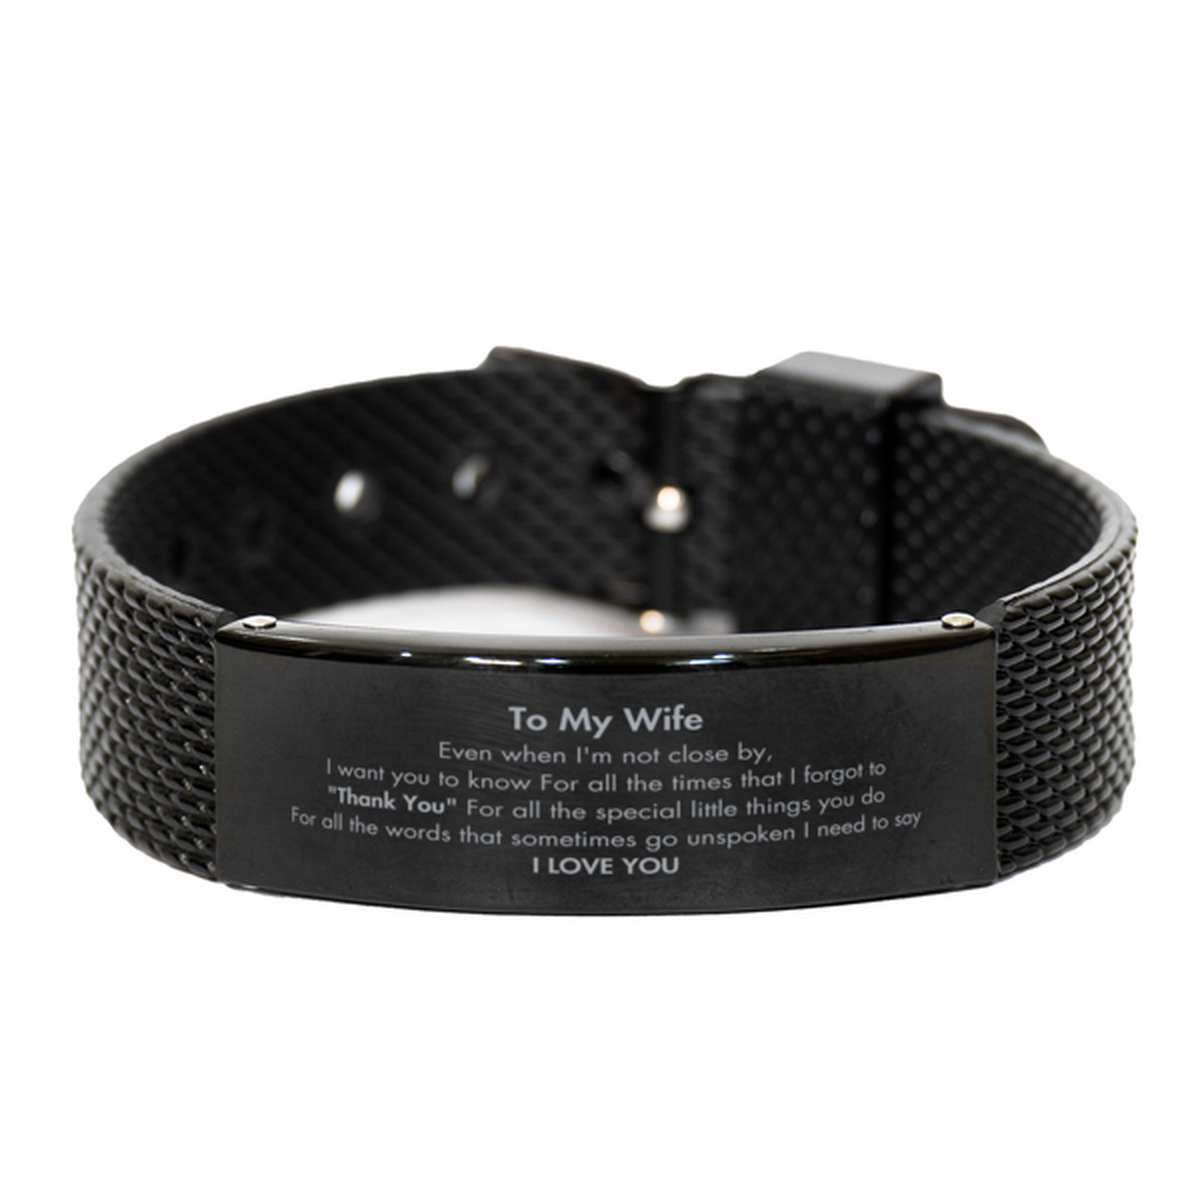 Thank You Gifts for Wife, Keepsake Black Shark Mesh Bracelet Gifts for Wife Birthday Mother's day Father's Day Wife For all the words That sometimes go unspoken I need to say I LOVE YOU